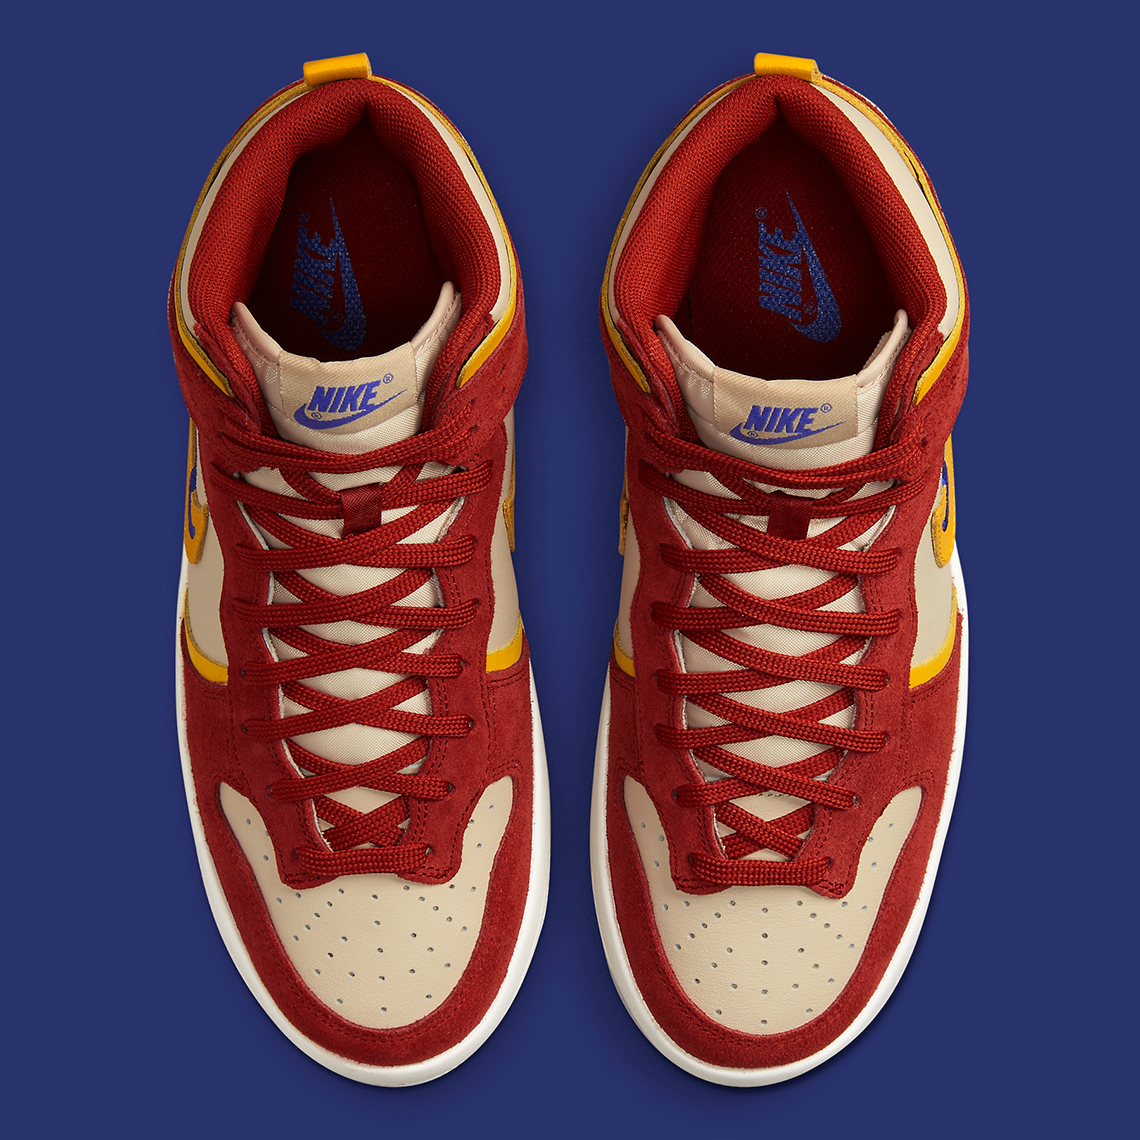 nike Dunk coat high up dh3718 600 release date 5